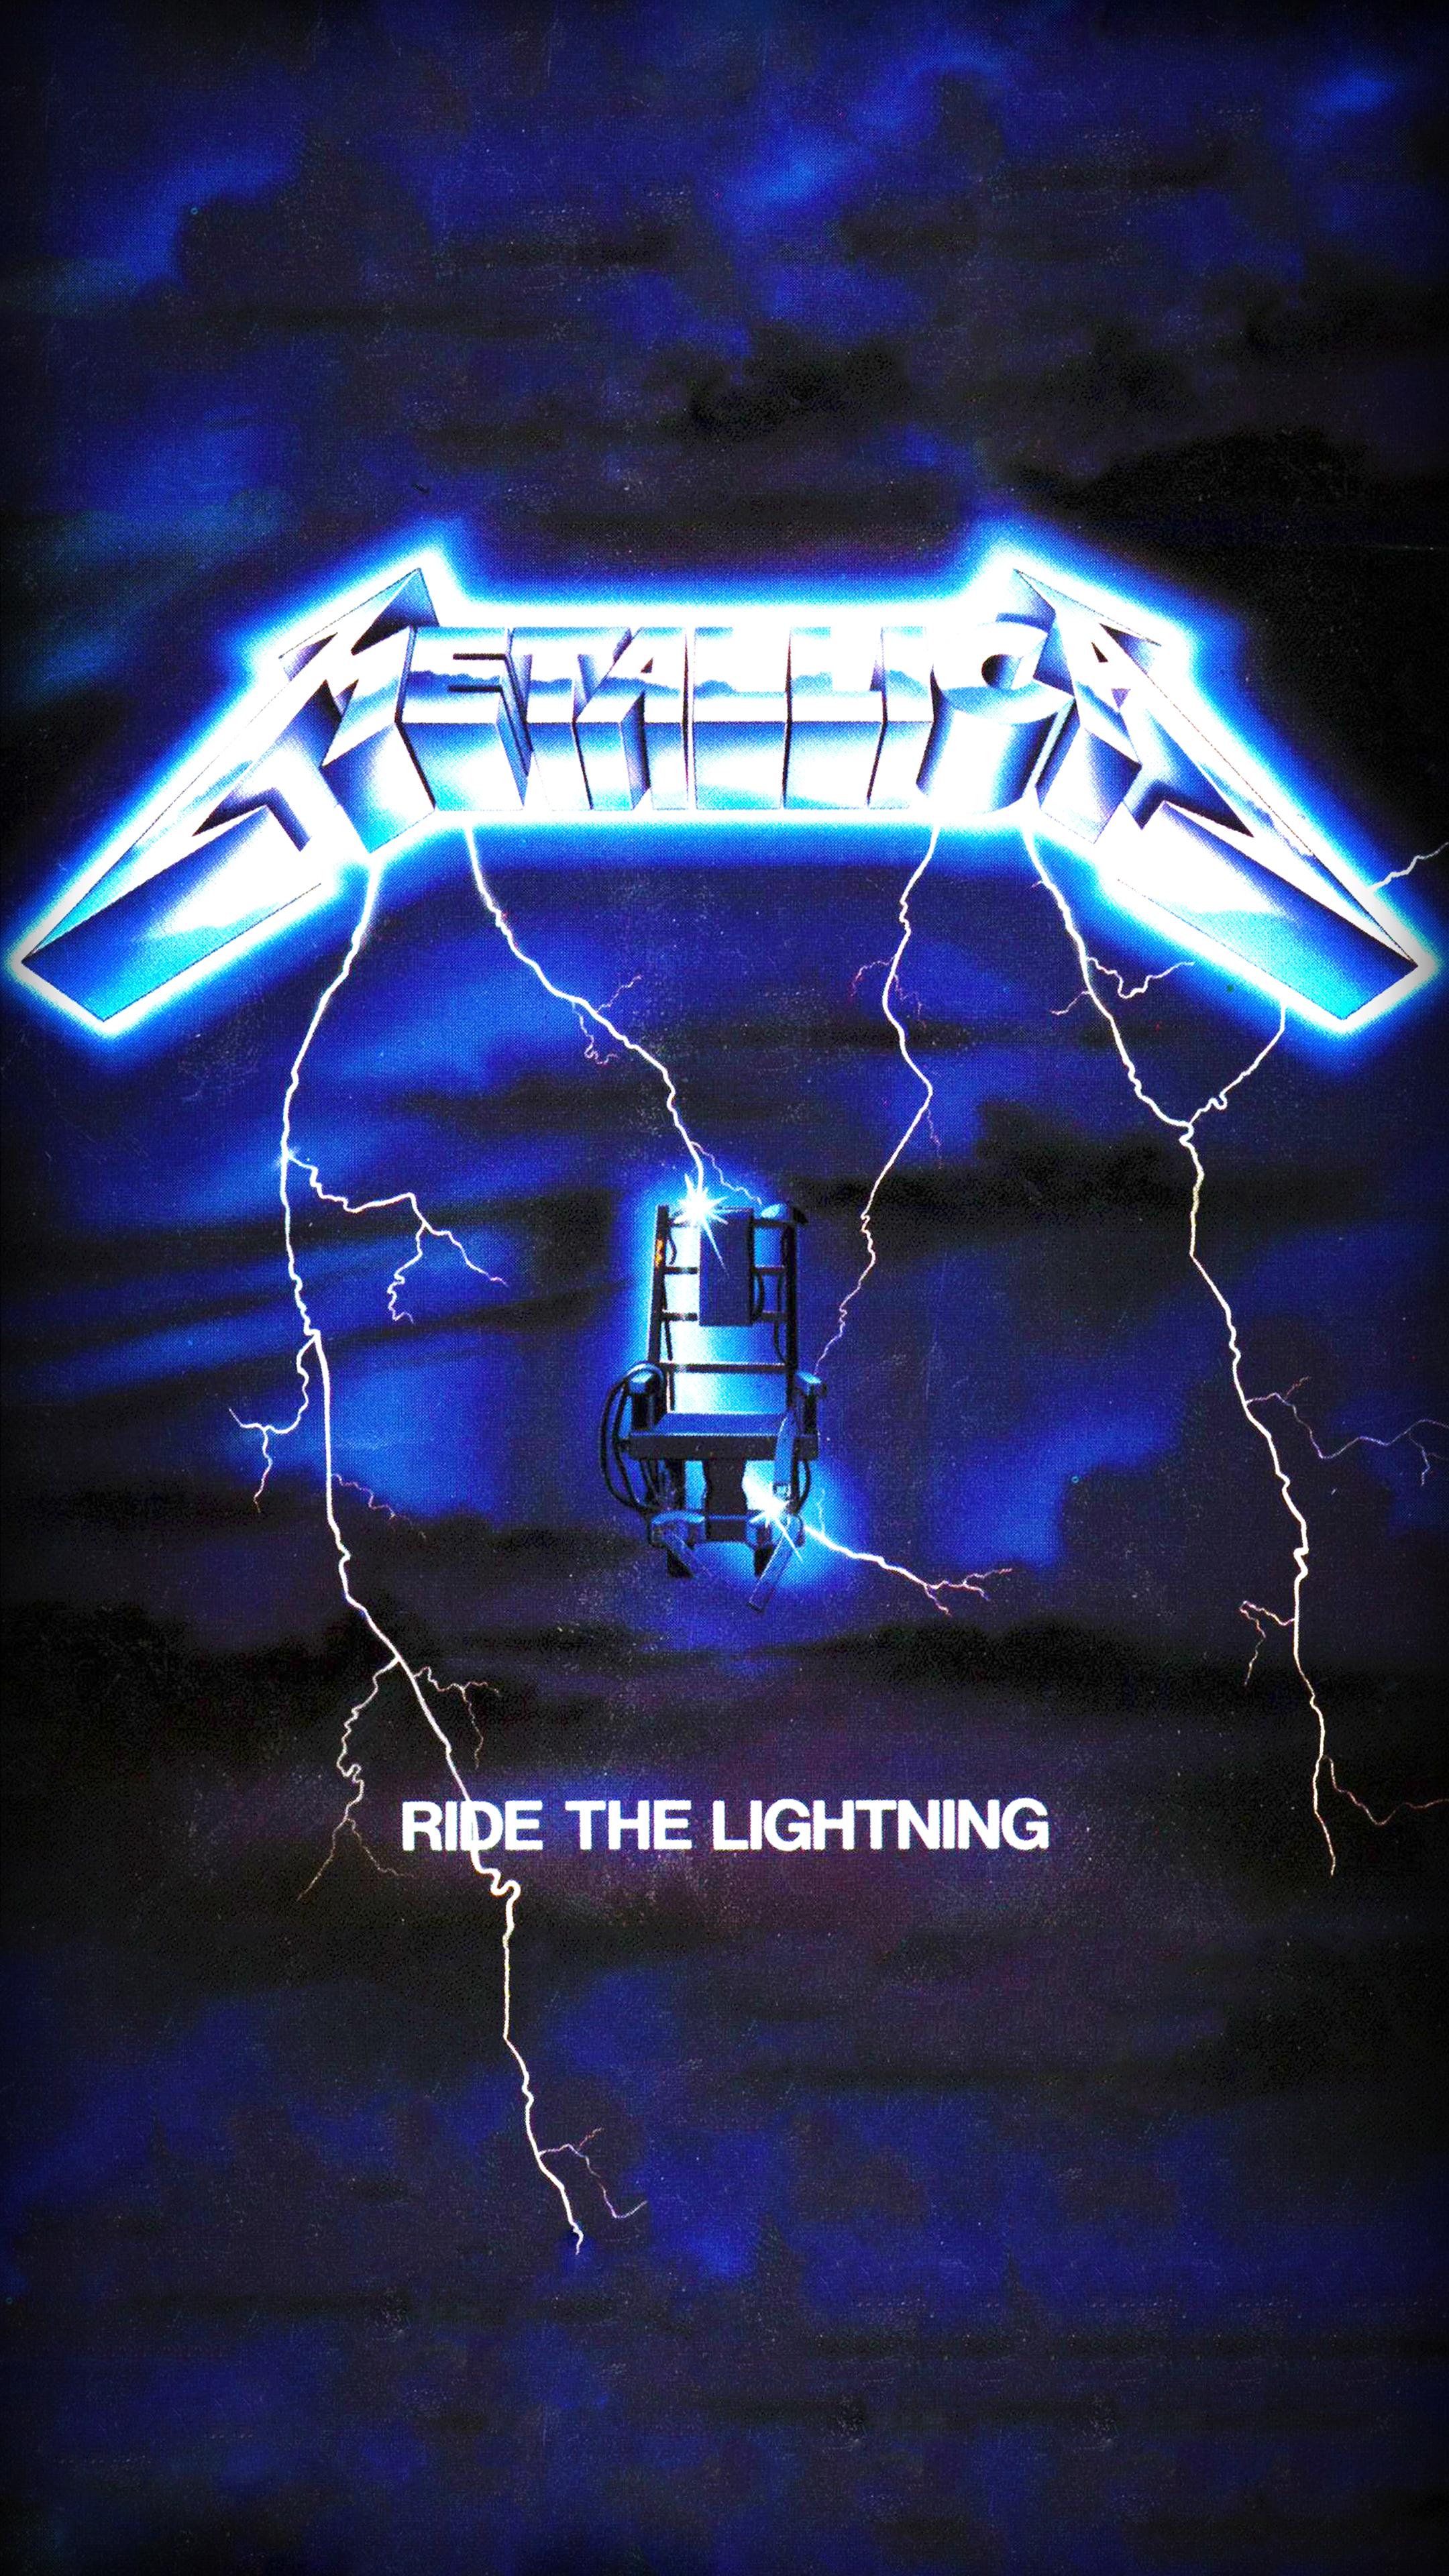 Made this ride the lightning phone wallpaper